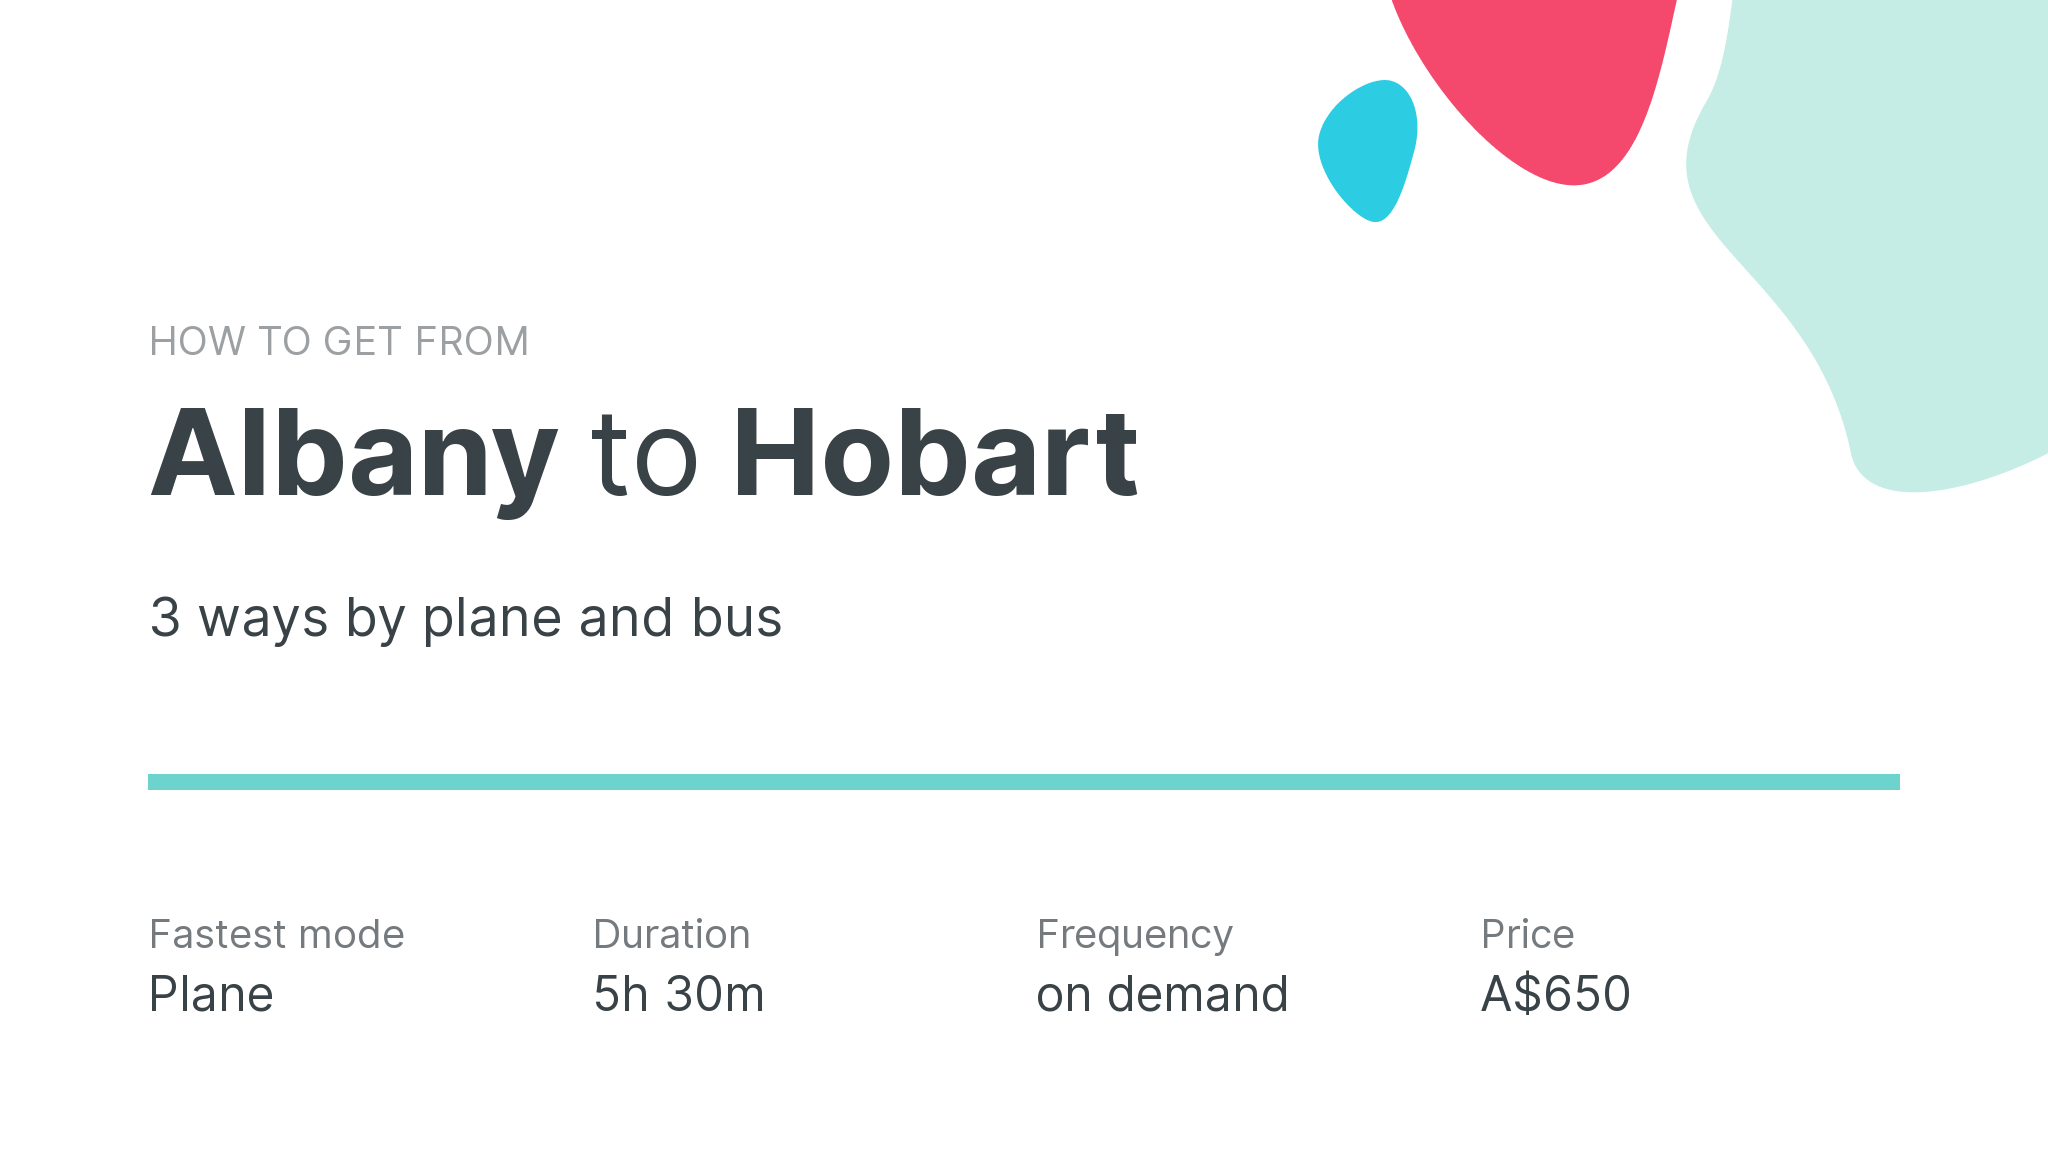 How do I get from Albany to Hobart